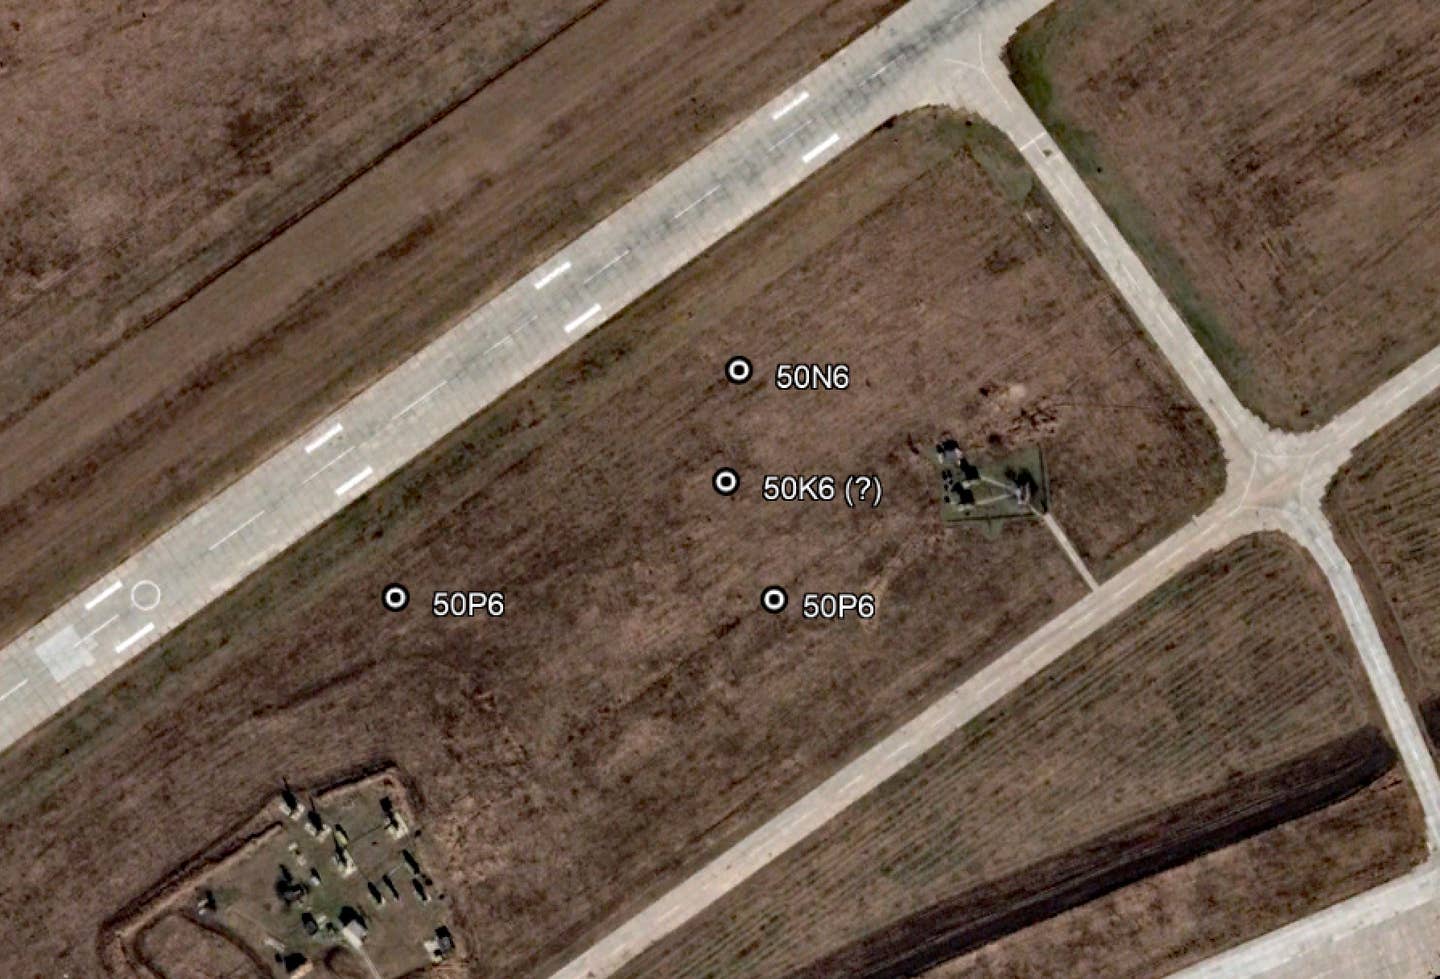 A close-up of the same satellite image showing part of Taganrog Tsentralnyi. The positions of the parts of the S-350 system are provided for reference. Note that the 50N6 series fire-control radar clearly seems to be oriented toward the west (and Ukraine) <em>Google Earth/Stefan Büttner</em>